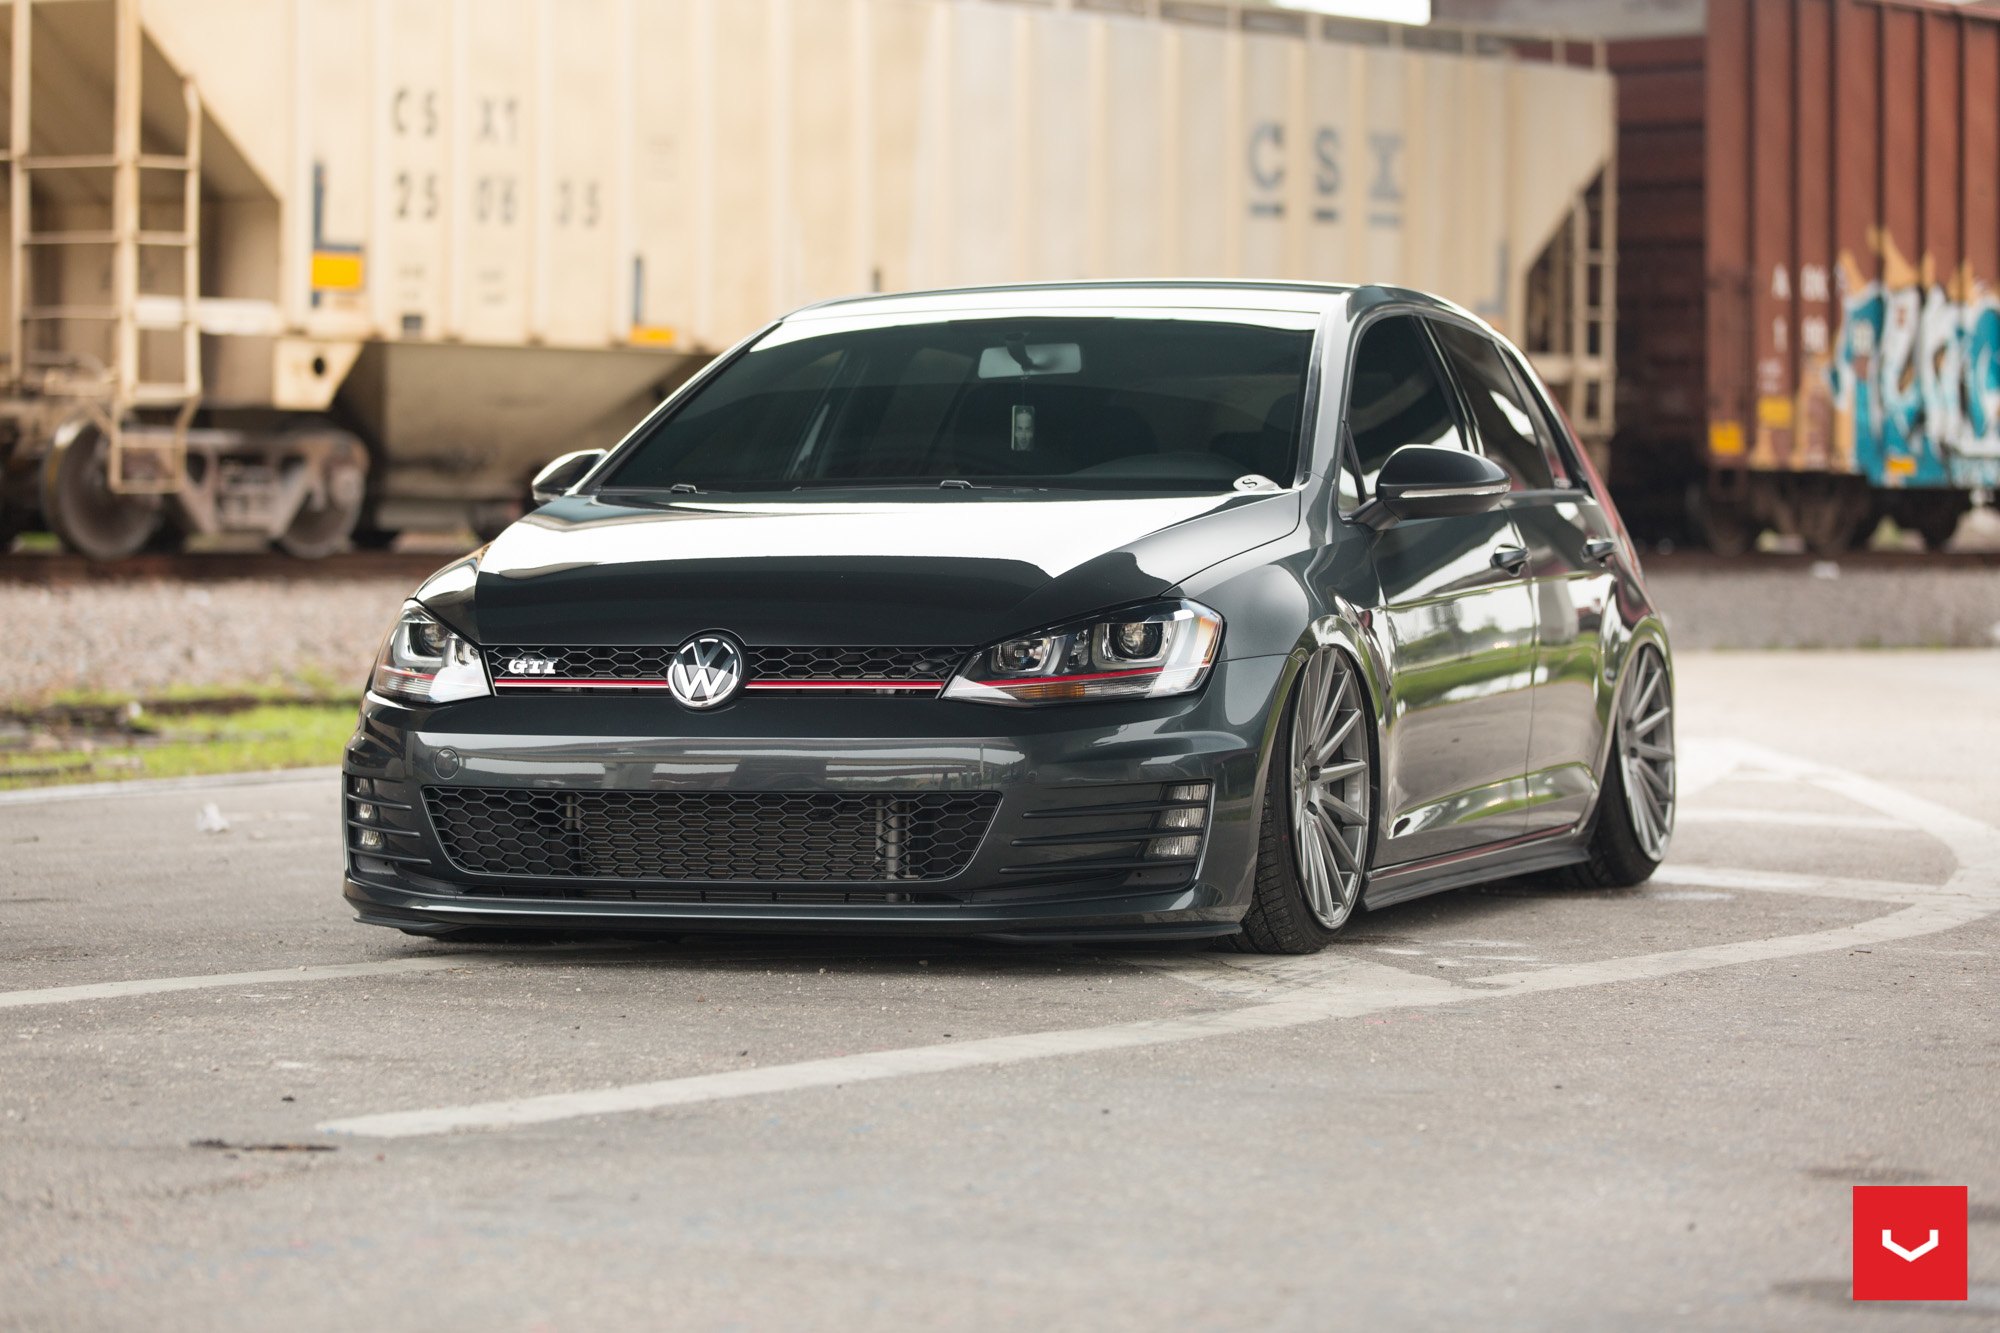 Stanced Black VW Golf GTI with Custom Front Bumper - Photo by Vossen